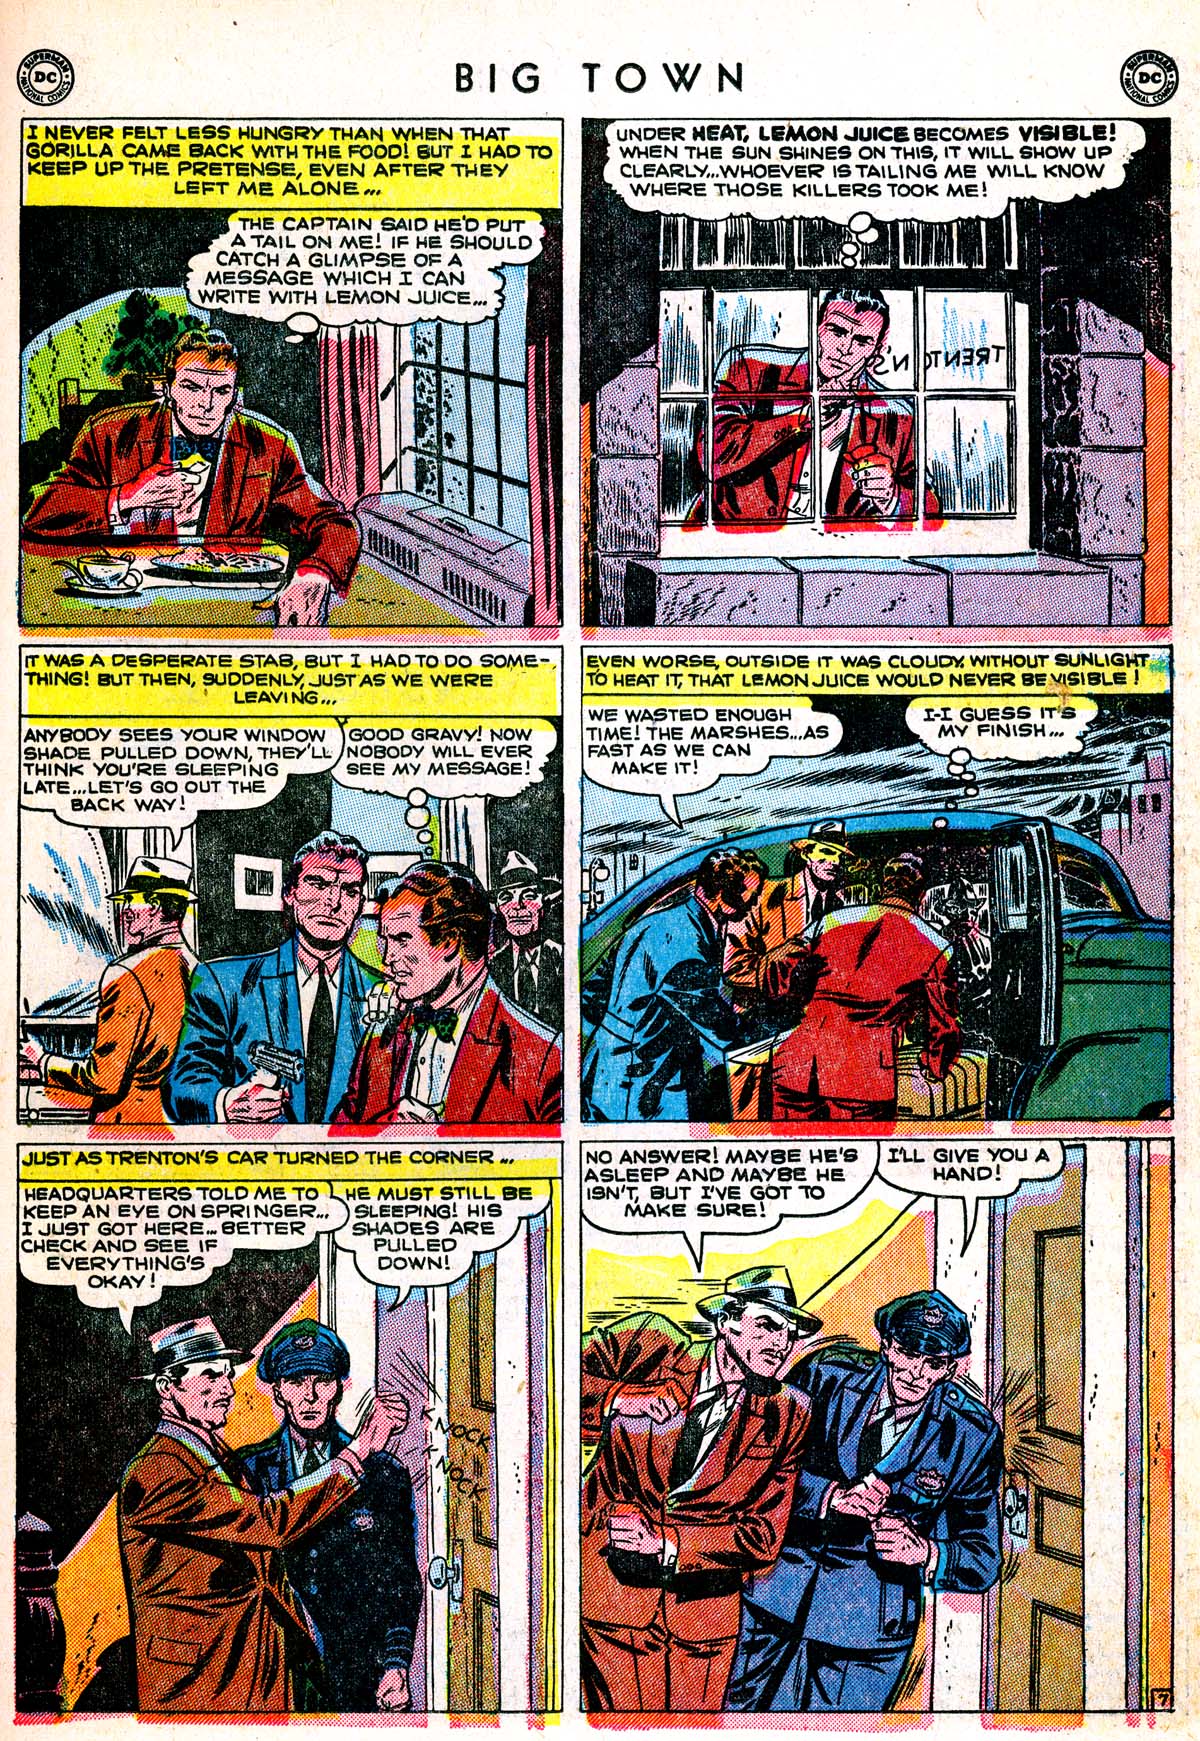 Big Town (1951) 1 Page 32